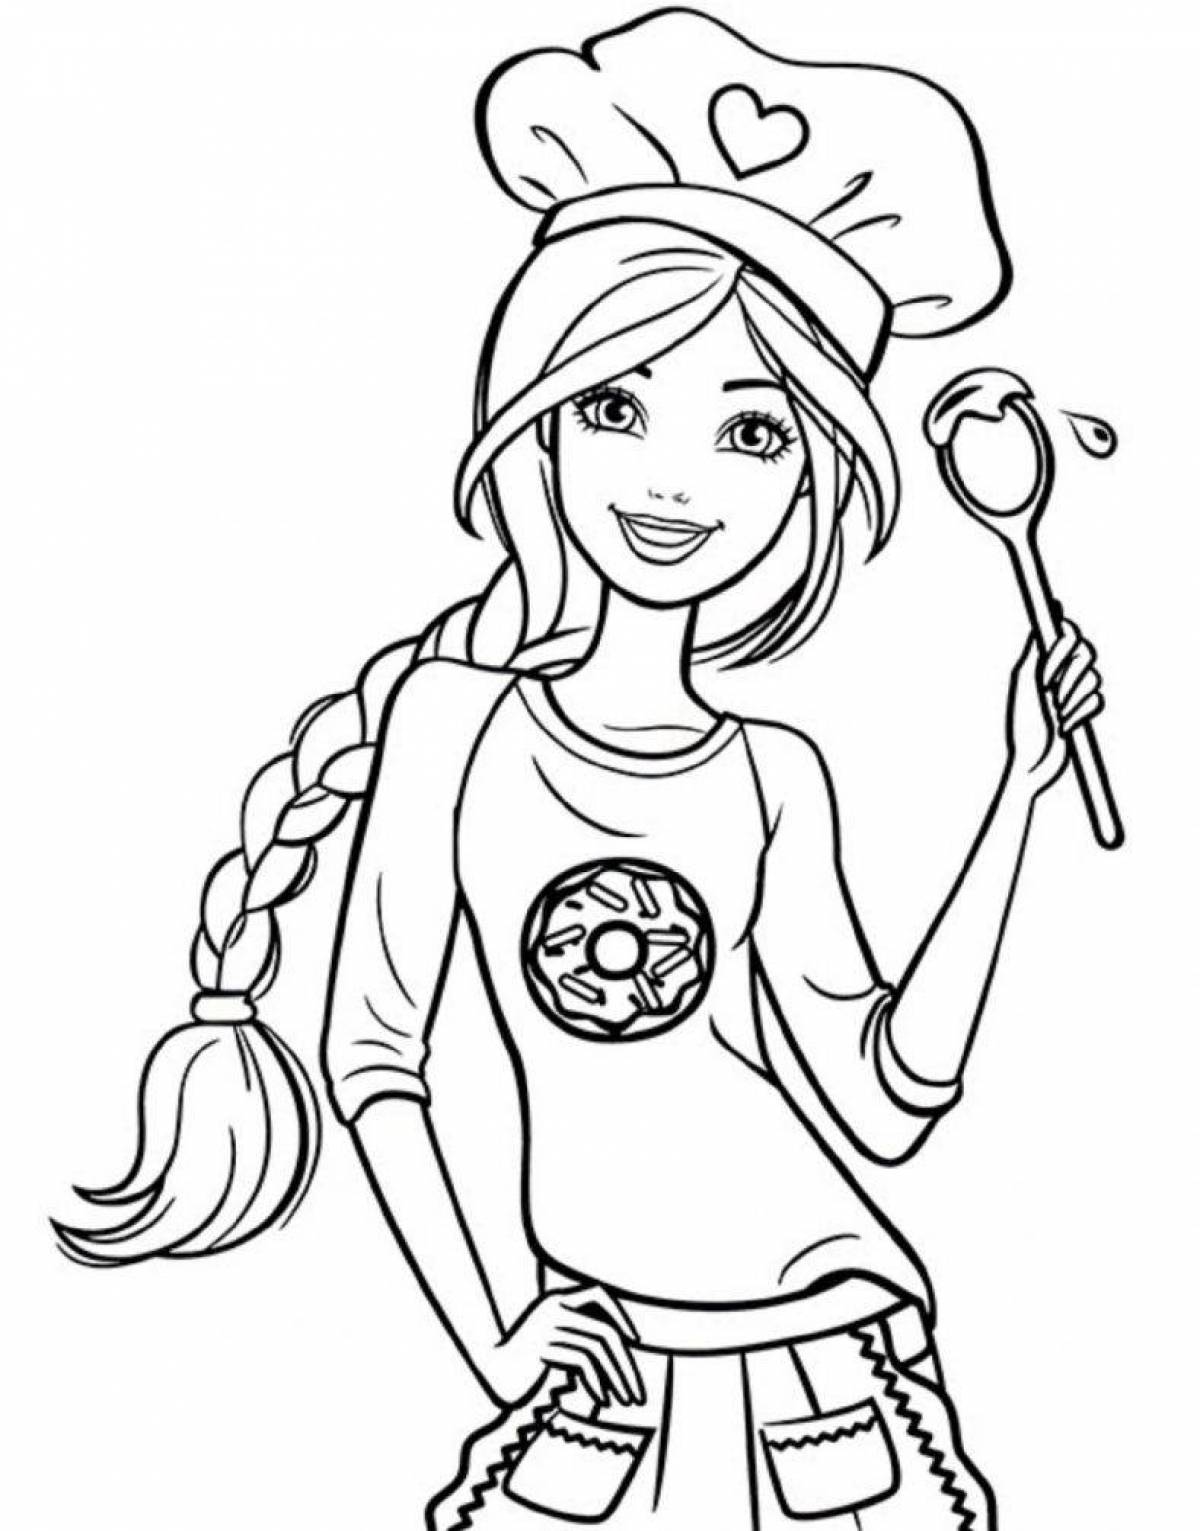 Great barbie coloring book for kids